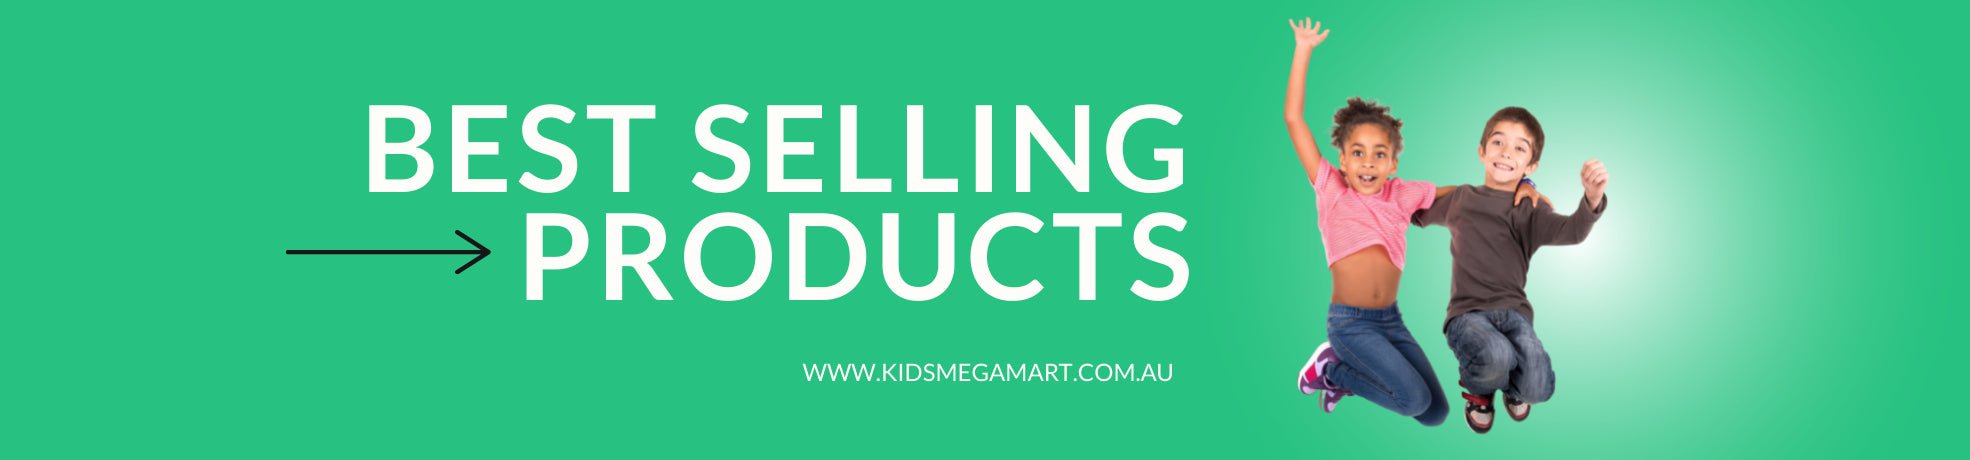 Unleash the Fun with Our Best Selling Toy Trampolines, Swing Sets - Kids Mega Mart